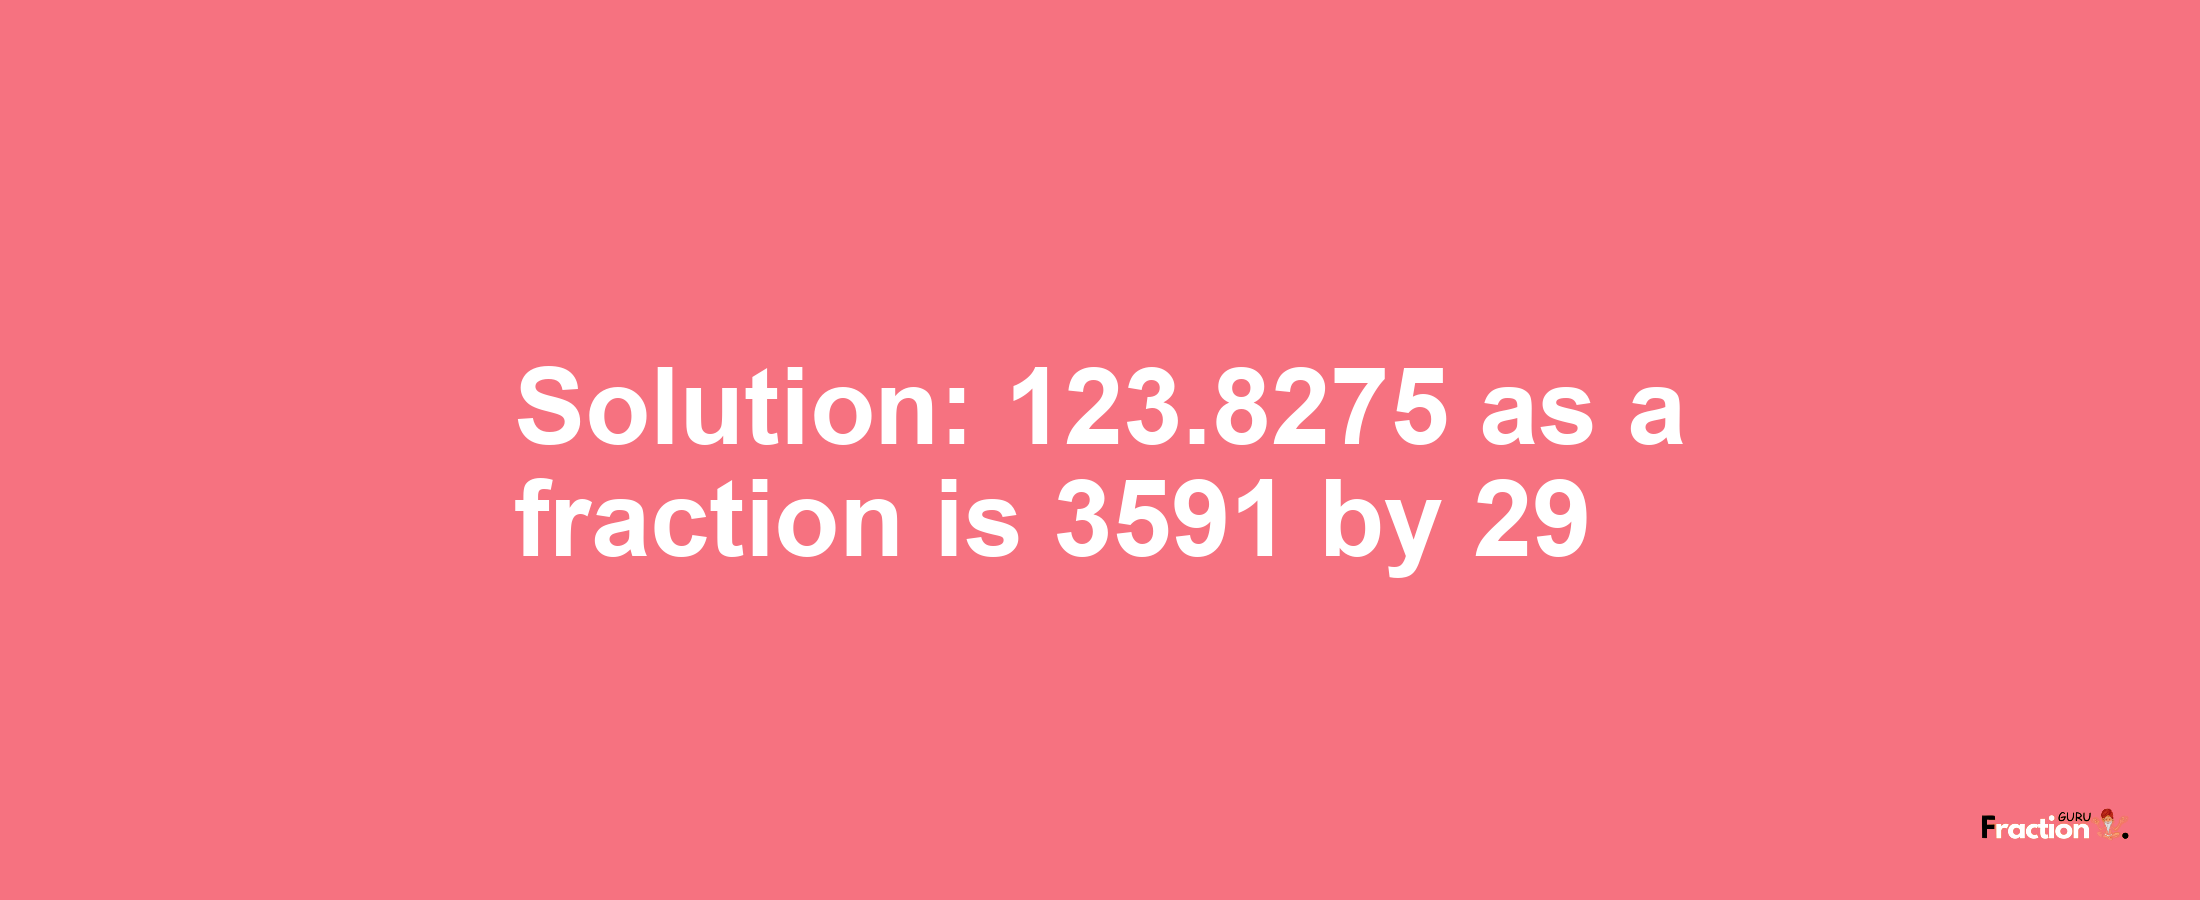 Solution:123.8275 as a fraction is 3591/29